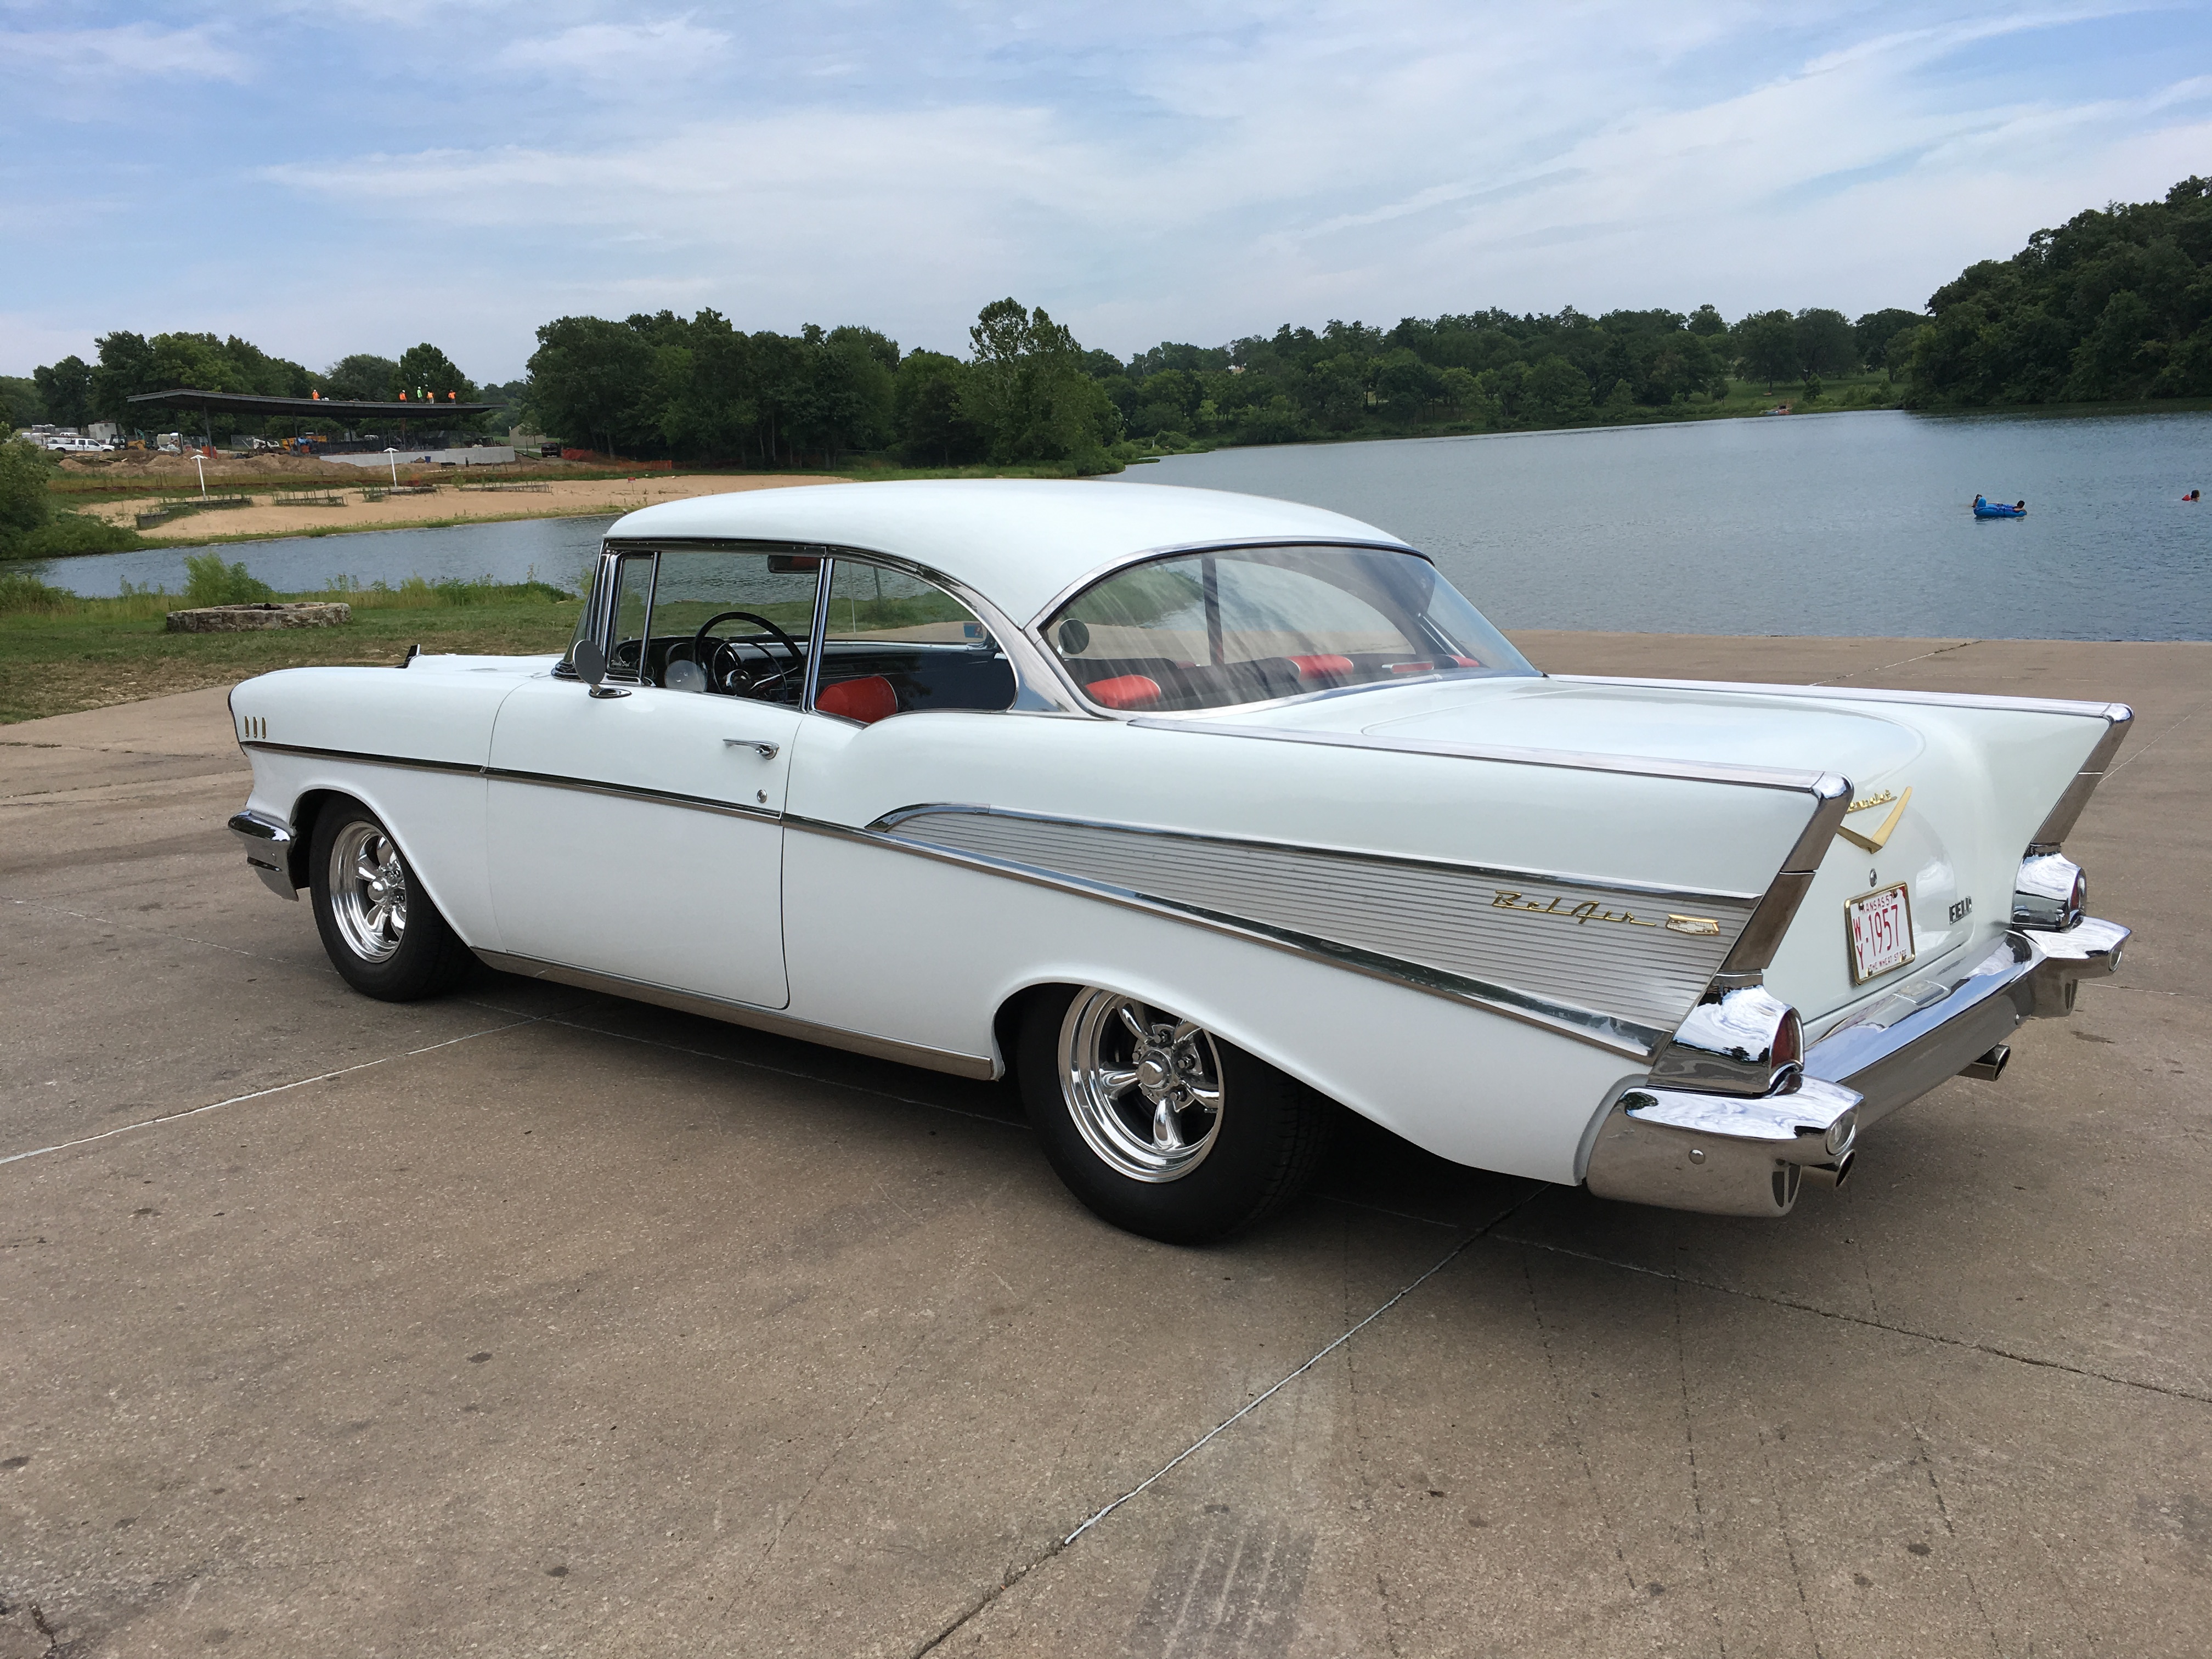 Kent bought this 1957 Bel Air after his other car was rear-ended. Little did he know that it would become a car he and his dad would share for years to come. | Submitted photo